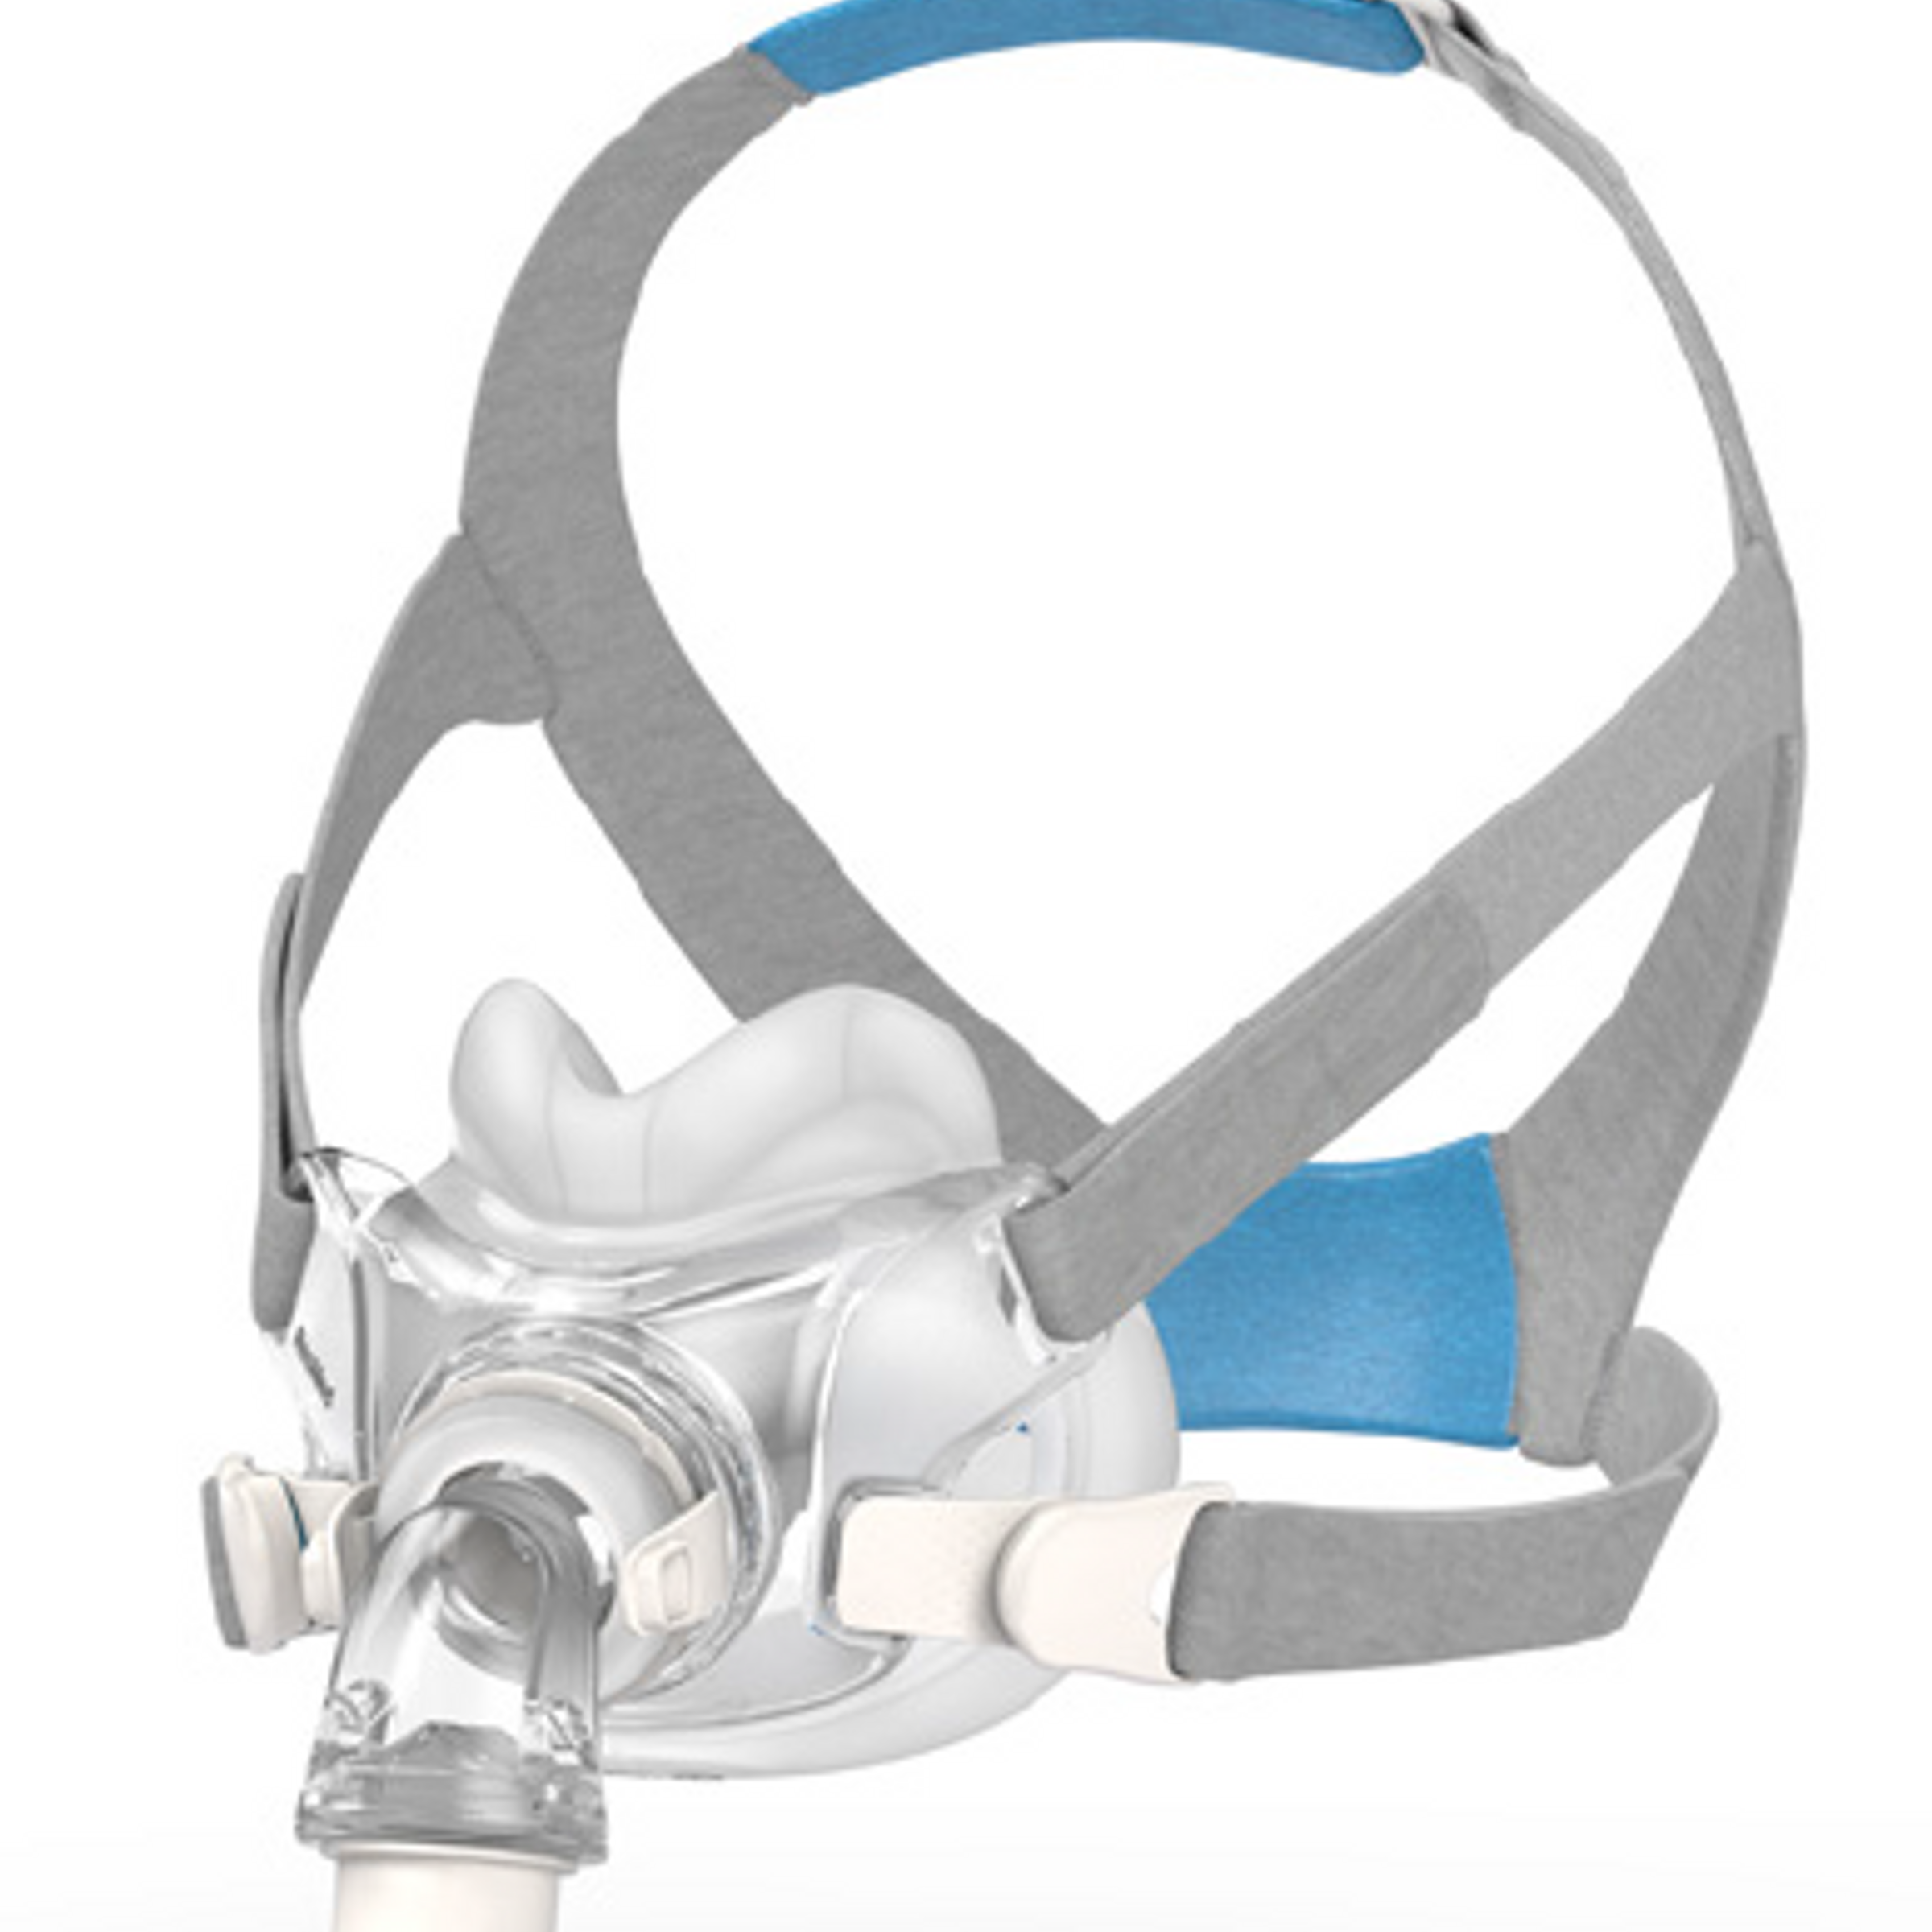 A product photo of the AirFit F30 Complete Mask System